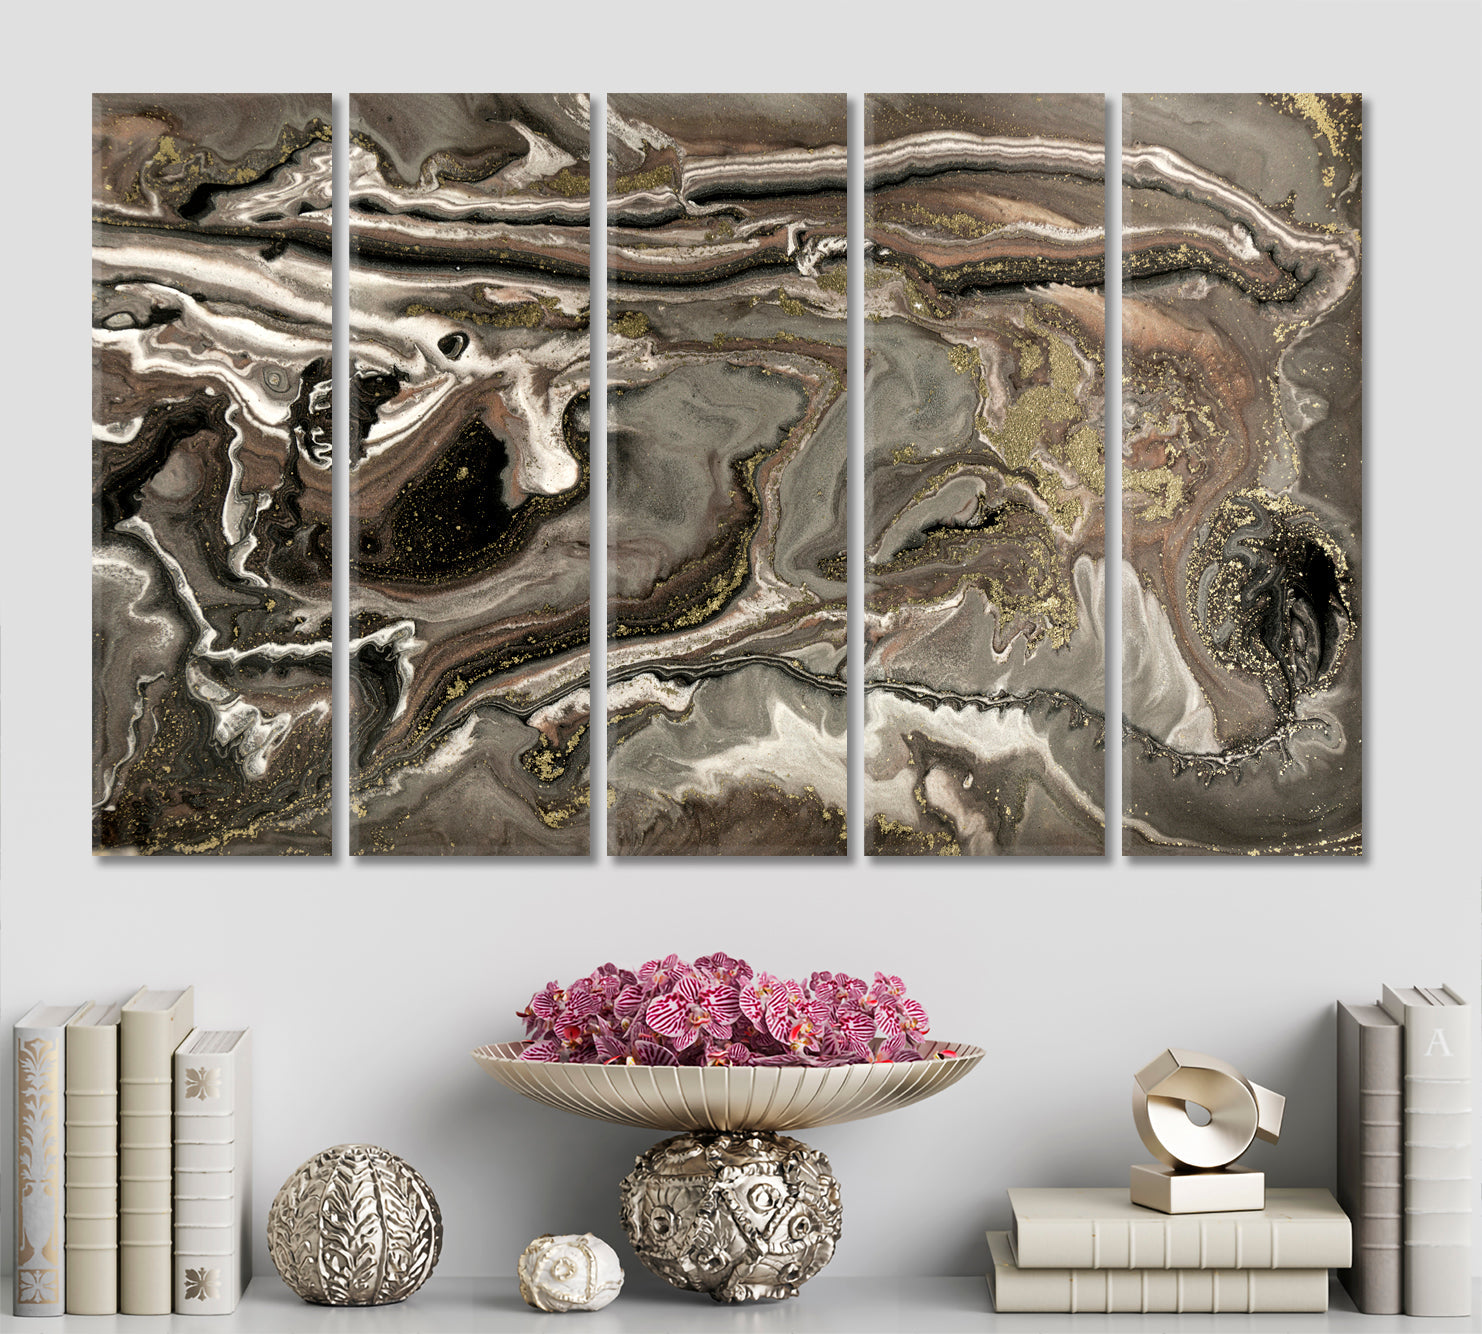 MOTHER OF PEARL Brown Pearlescent Colors Gold Powder Flecks Fluid Art, Oriental Marbling Canvas Print Artesty 5 panels 36" x 24" 